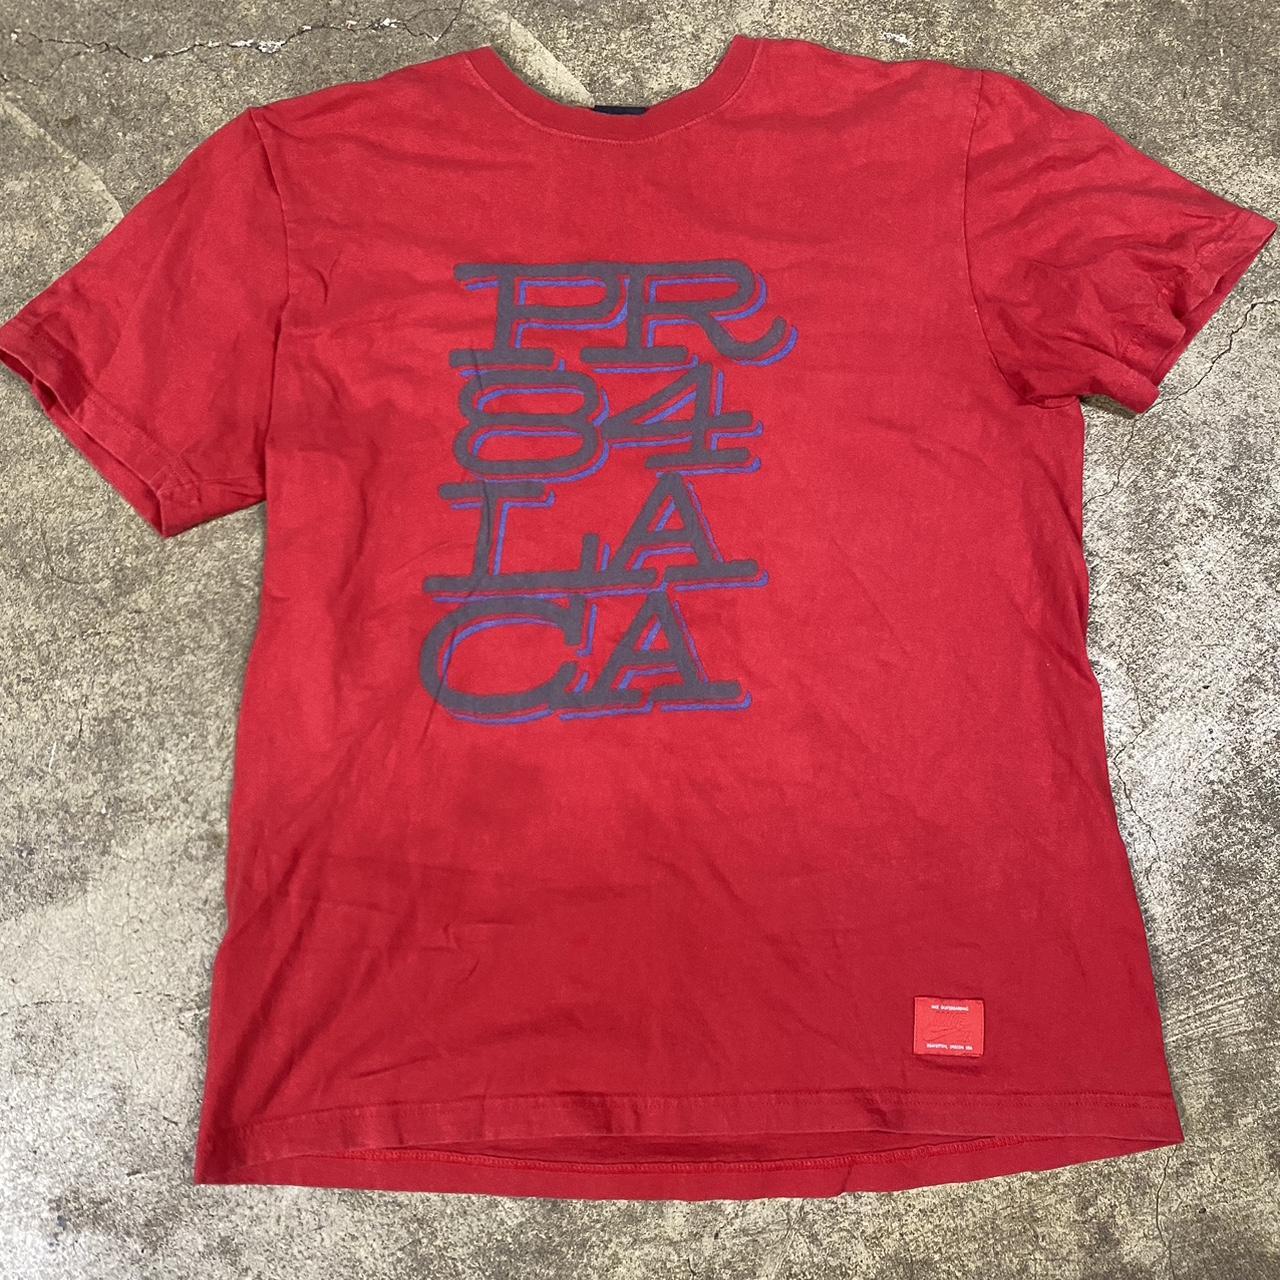 Nike Men's Red and Blue T-shirt